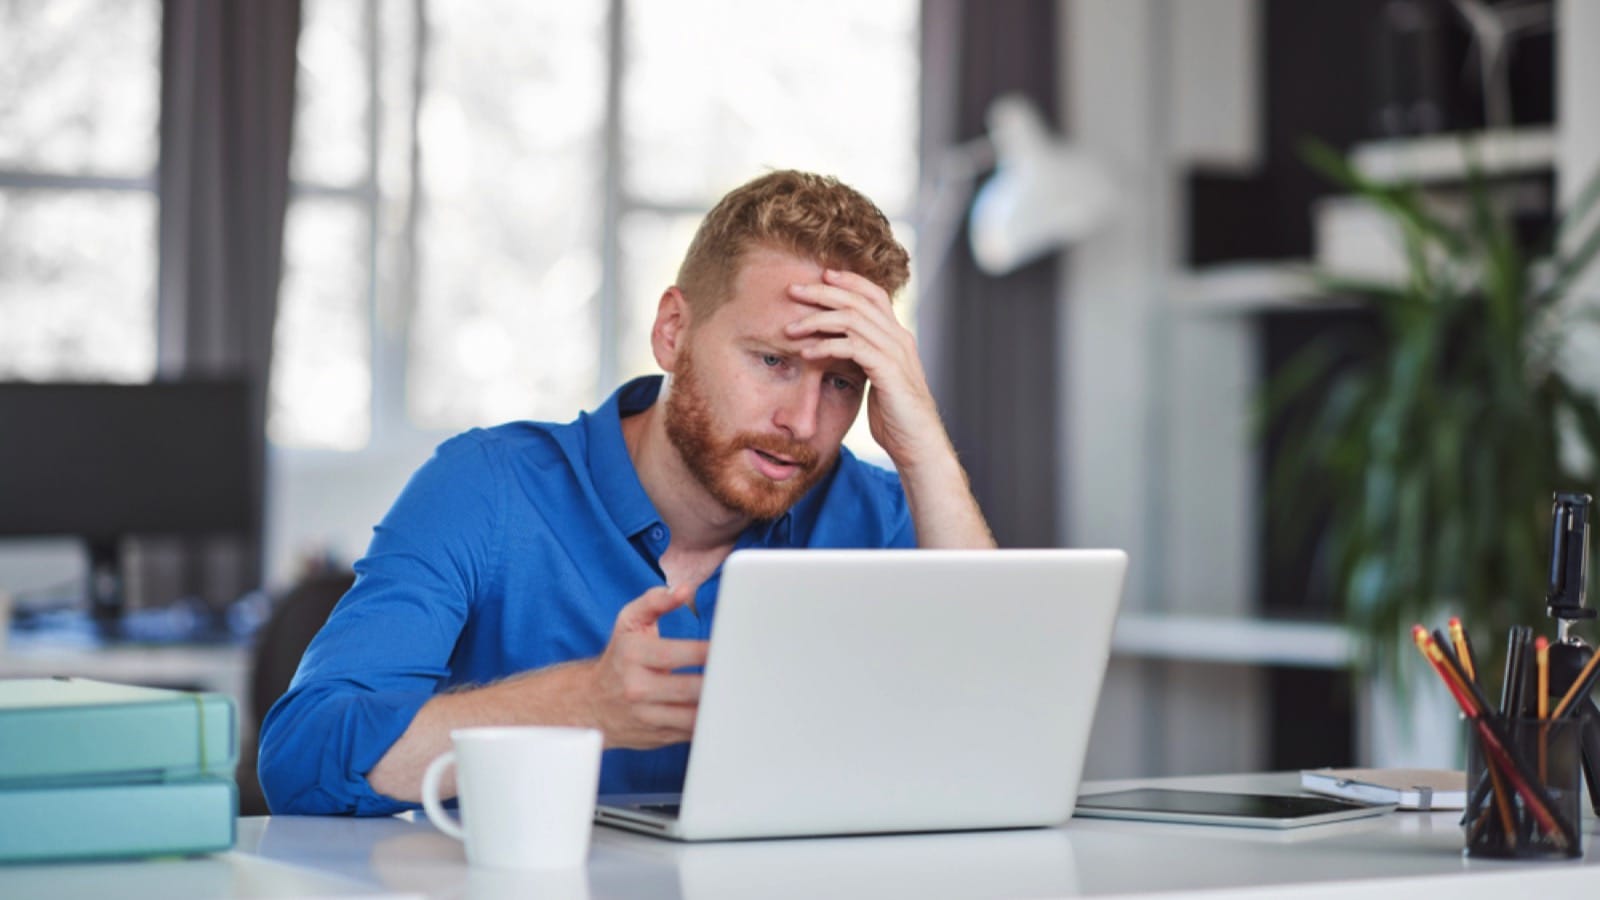 Man stressed out seeing bills